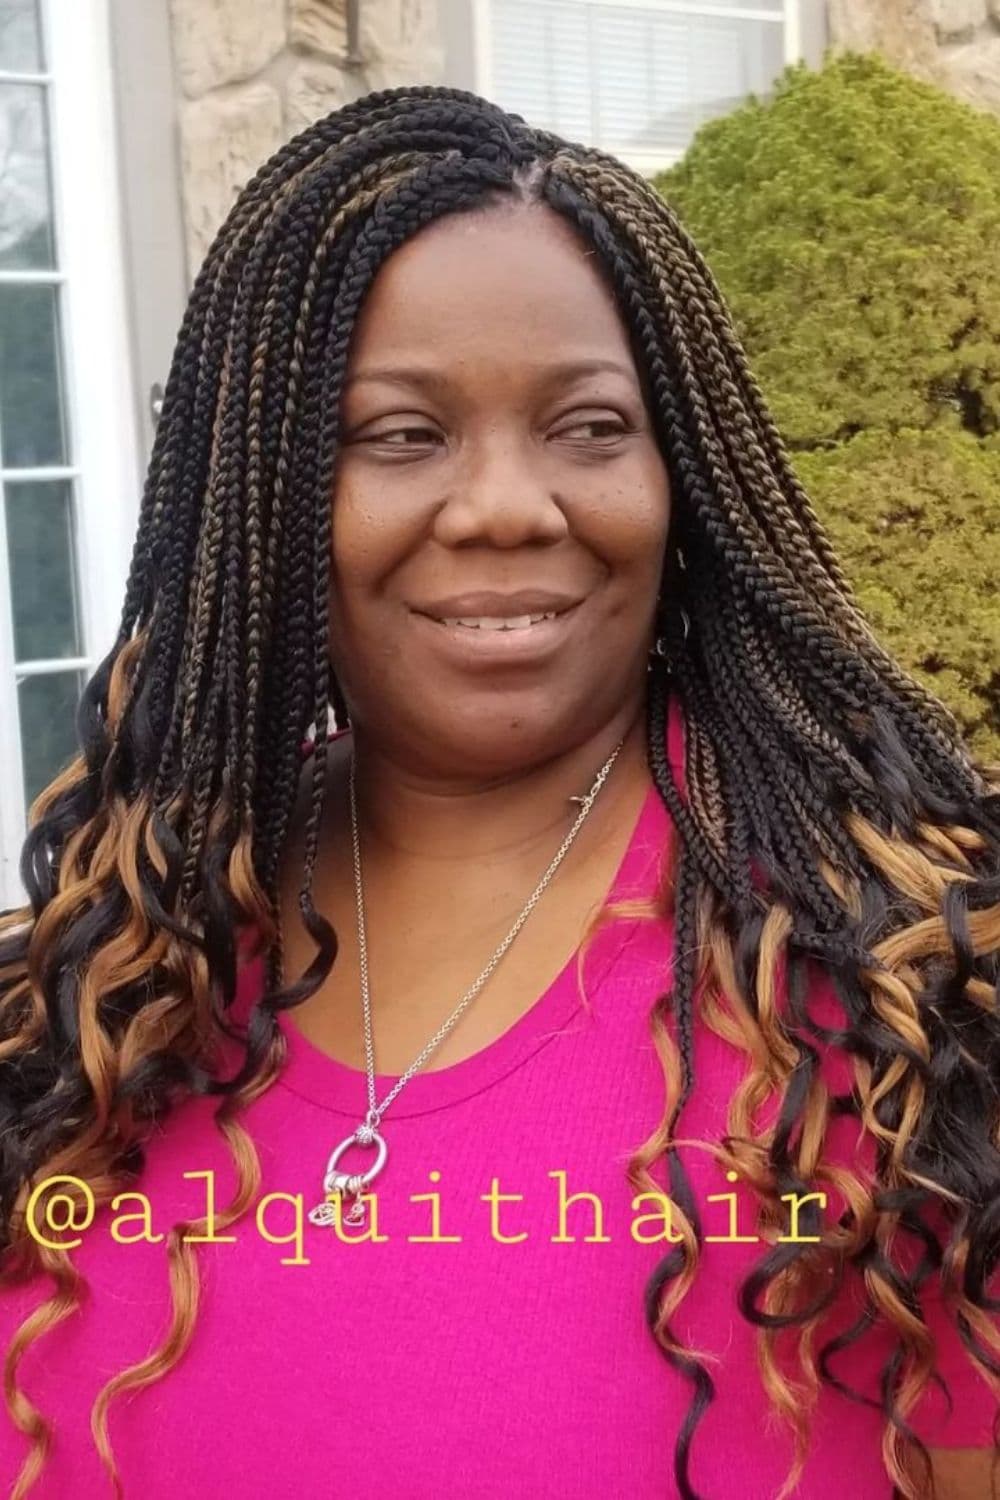 A woman with brown and black crochet braids with curly ends.